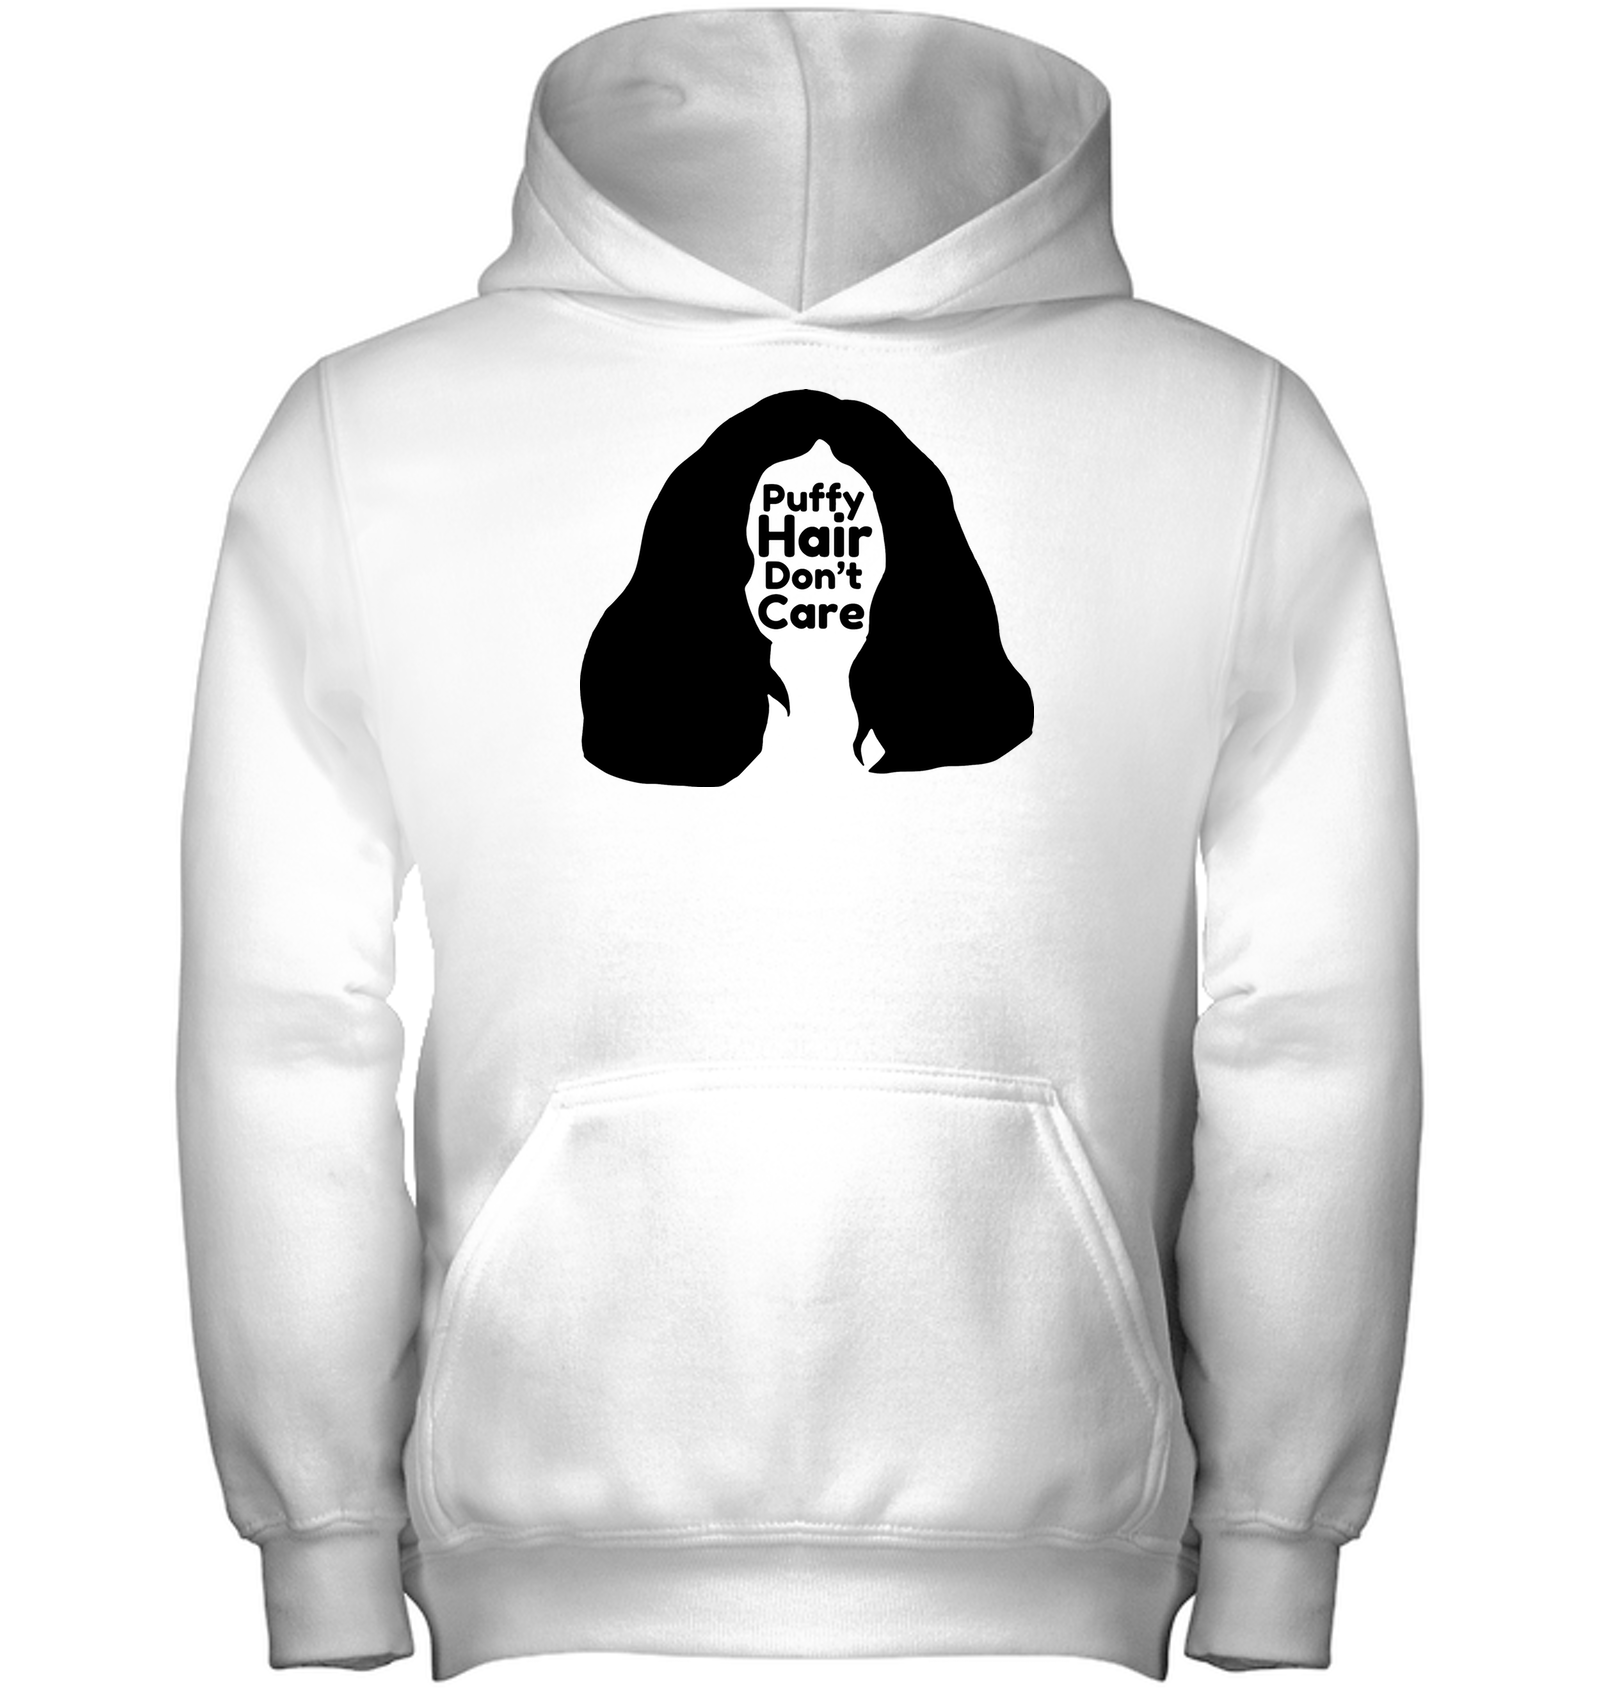 Puffy Hair Don't Care, Sophie - Gildan Youth Heavyweight Pullover Hoodie